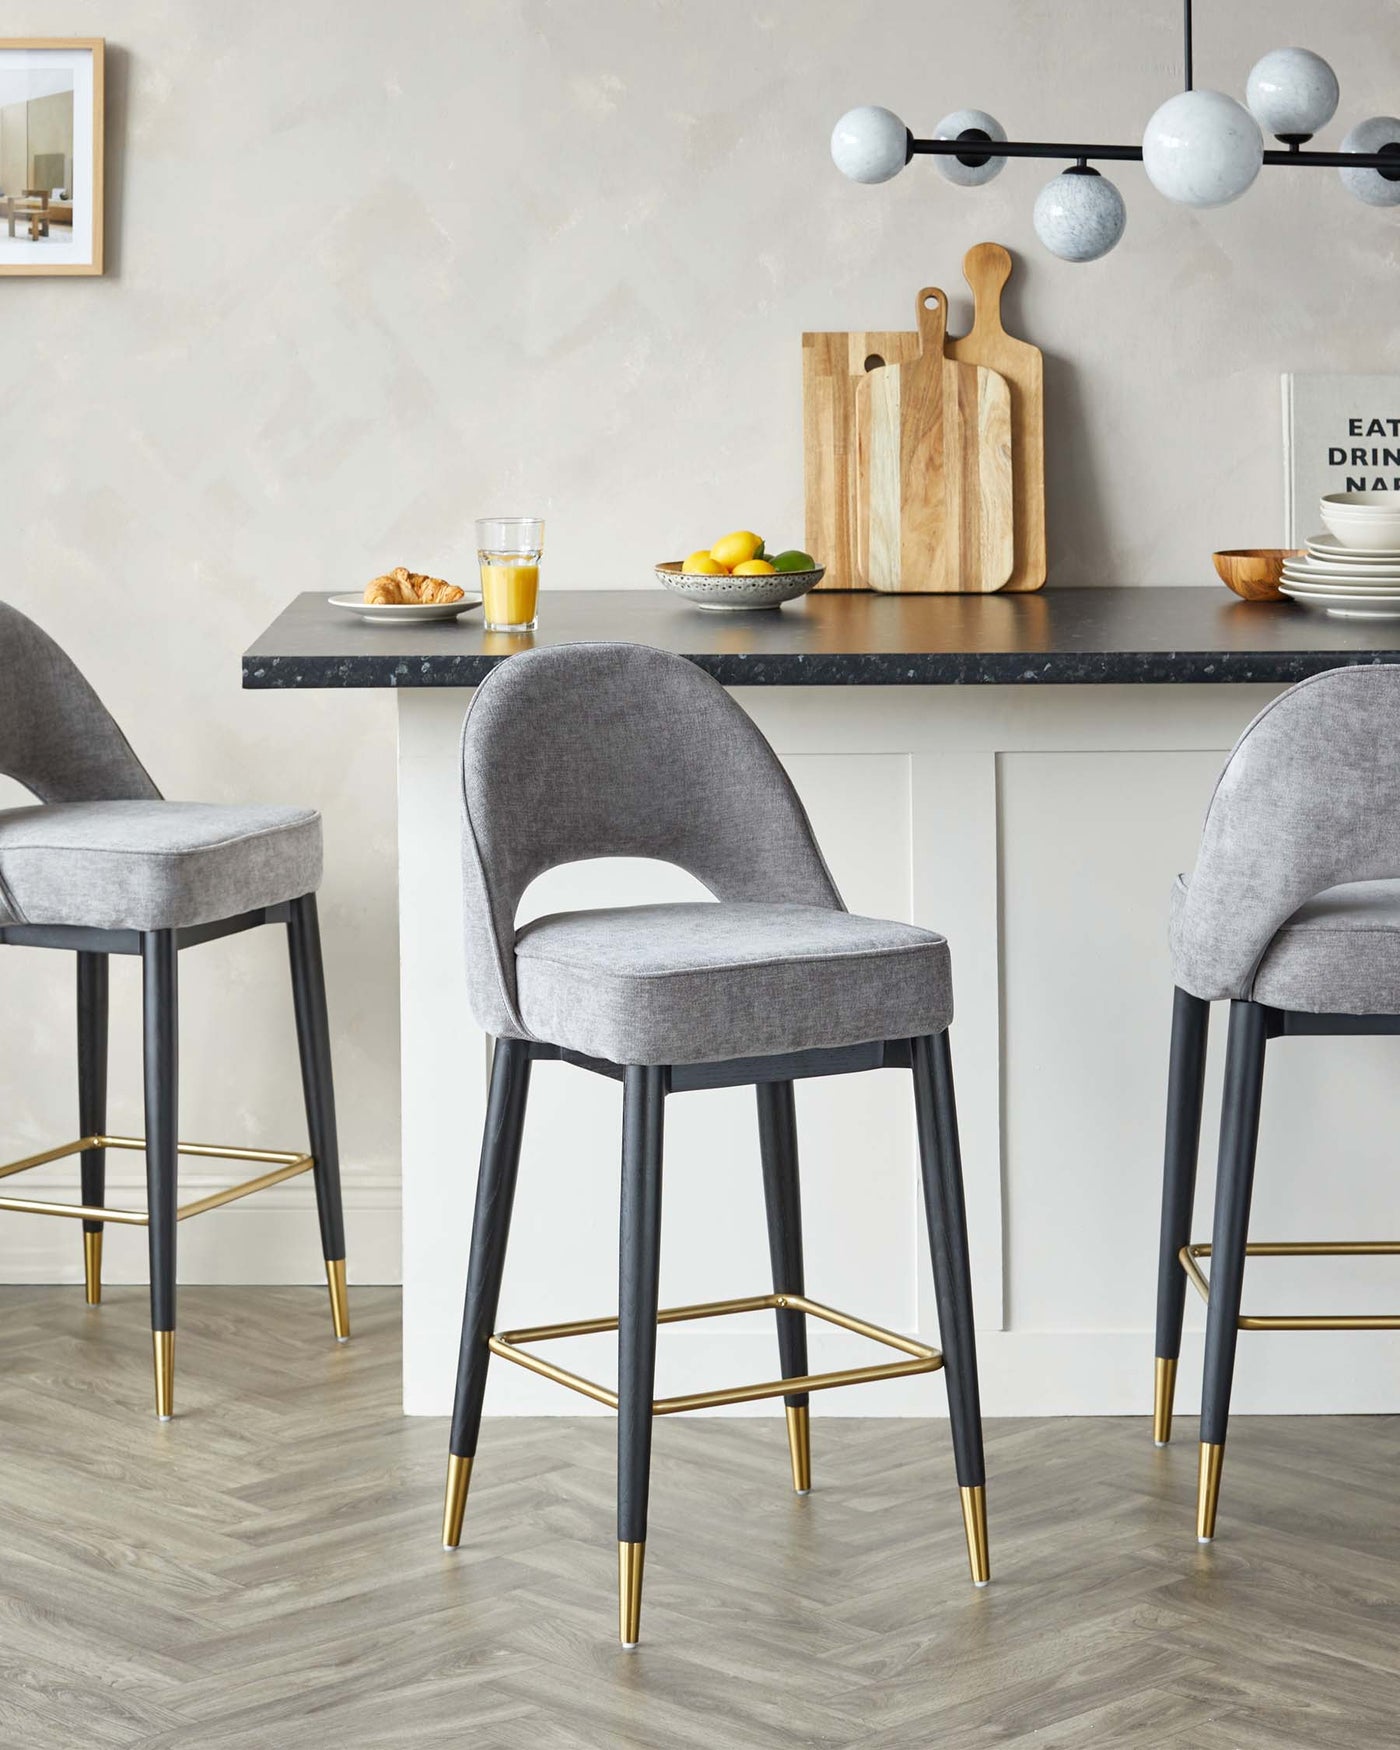 Elegant modern bar stools with grey upholstered seats and backs, black legs with gold footrests and gold accents at the bottom, positioned around a kitchen island.